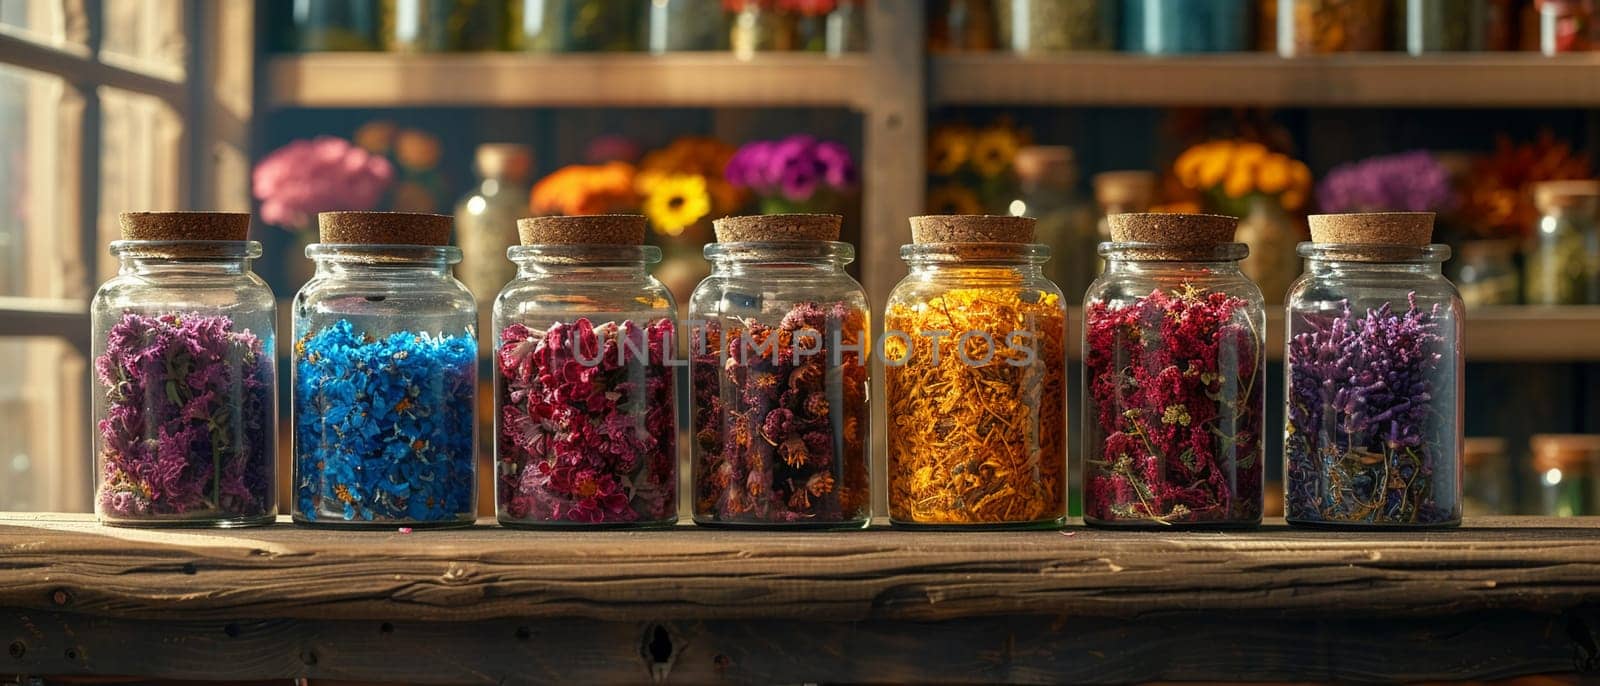 Herbalist Shop Bottles Wellness in Business of Natural Remedies, Jars and herbs concoct a story of healing and nature in the wellness business.